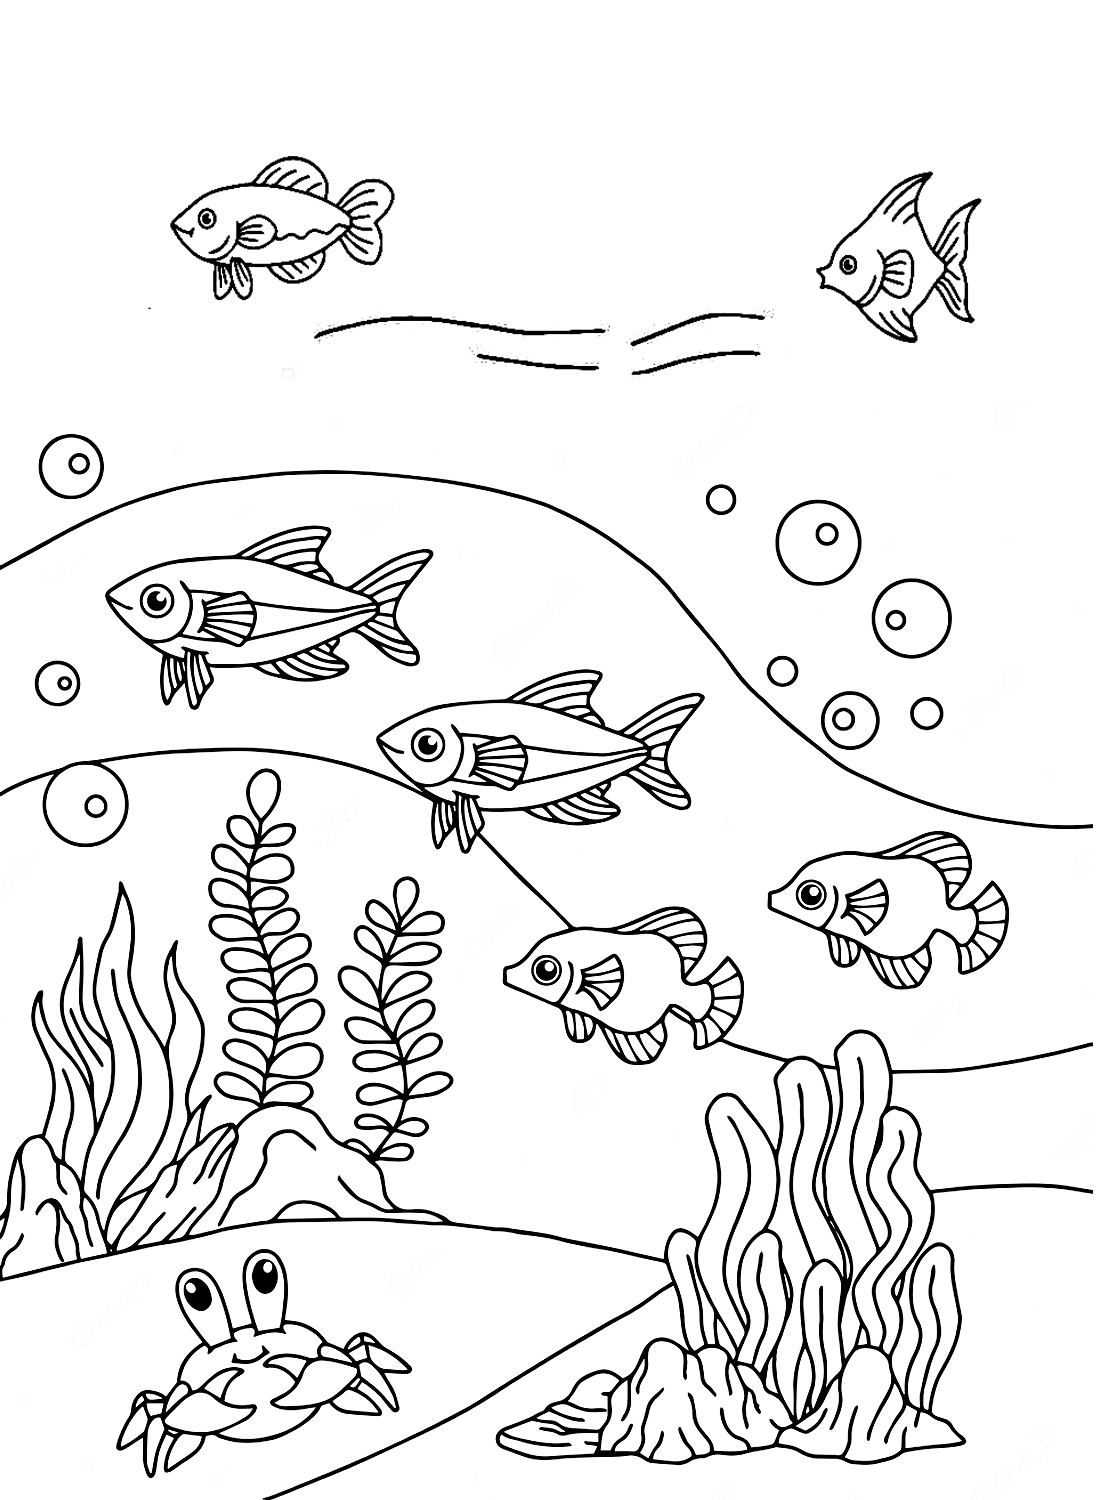 Coral and fishes Coloring Page